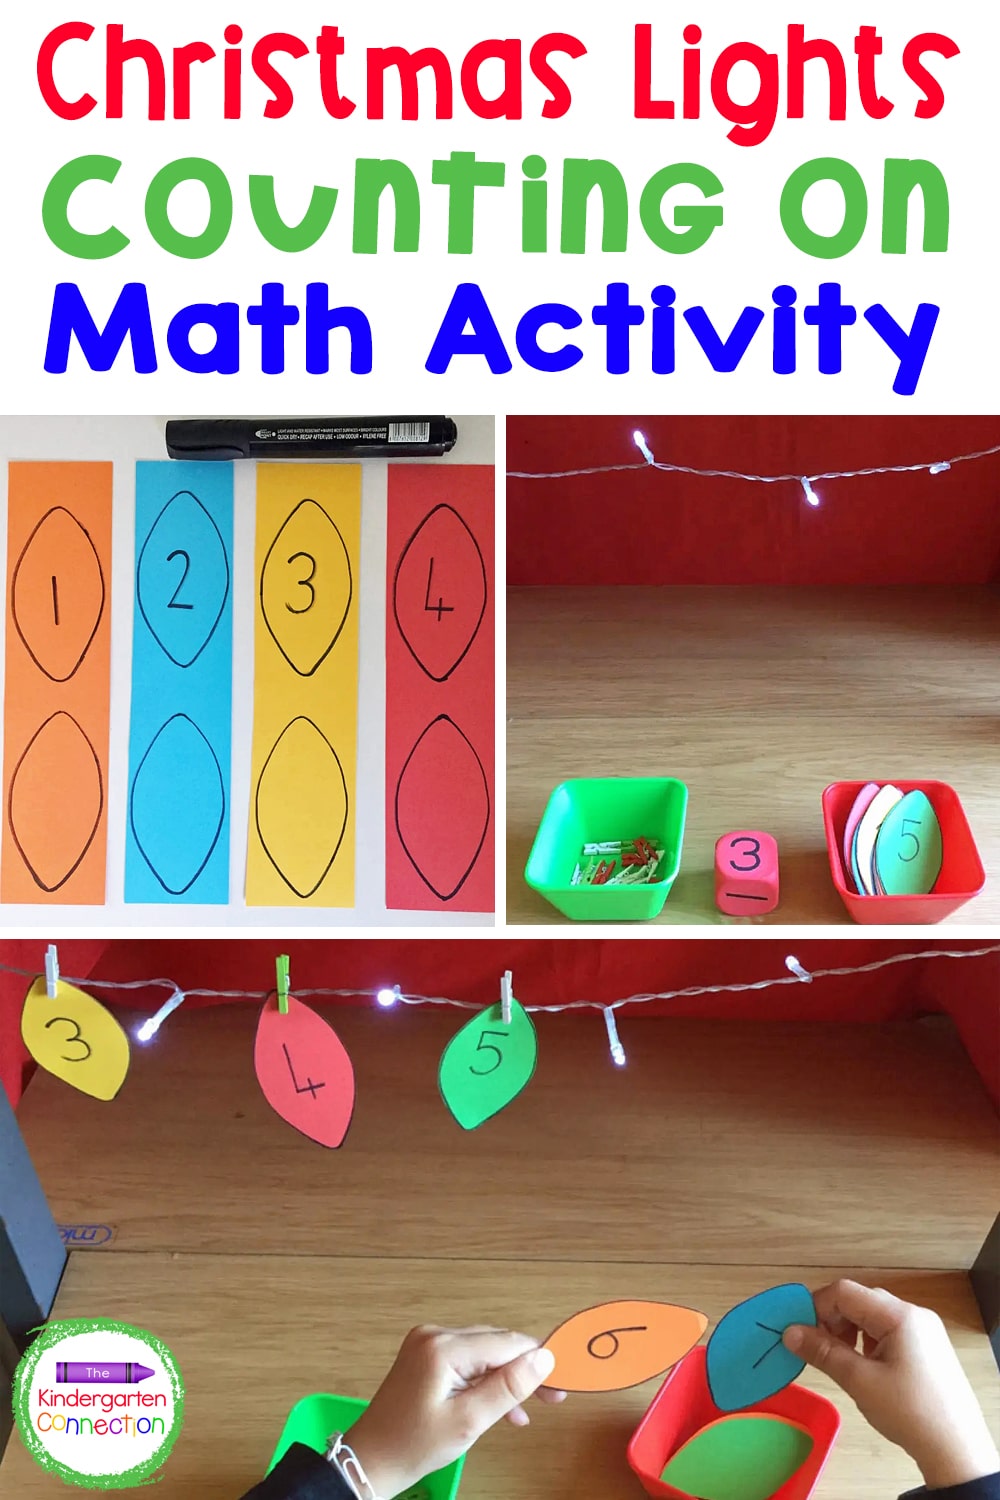 This Christmas counting on activity is so fun for Pre-K and Kindergarten kids to work on number order and counting skills!